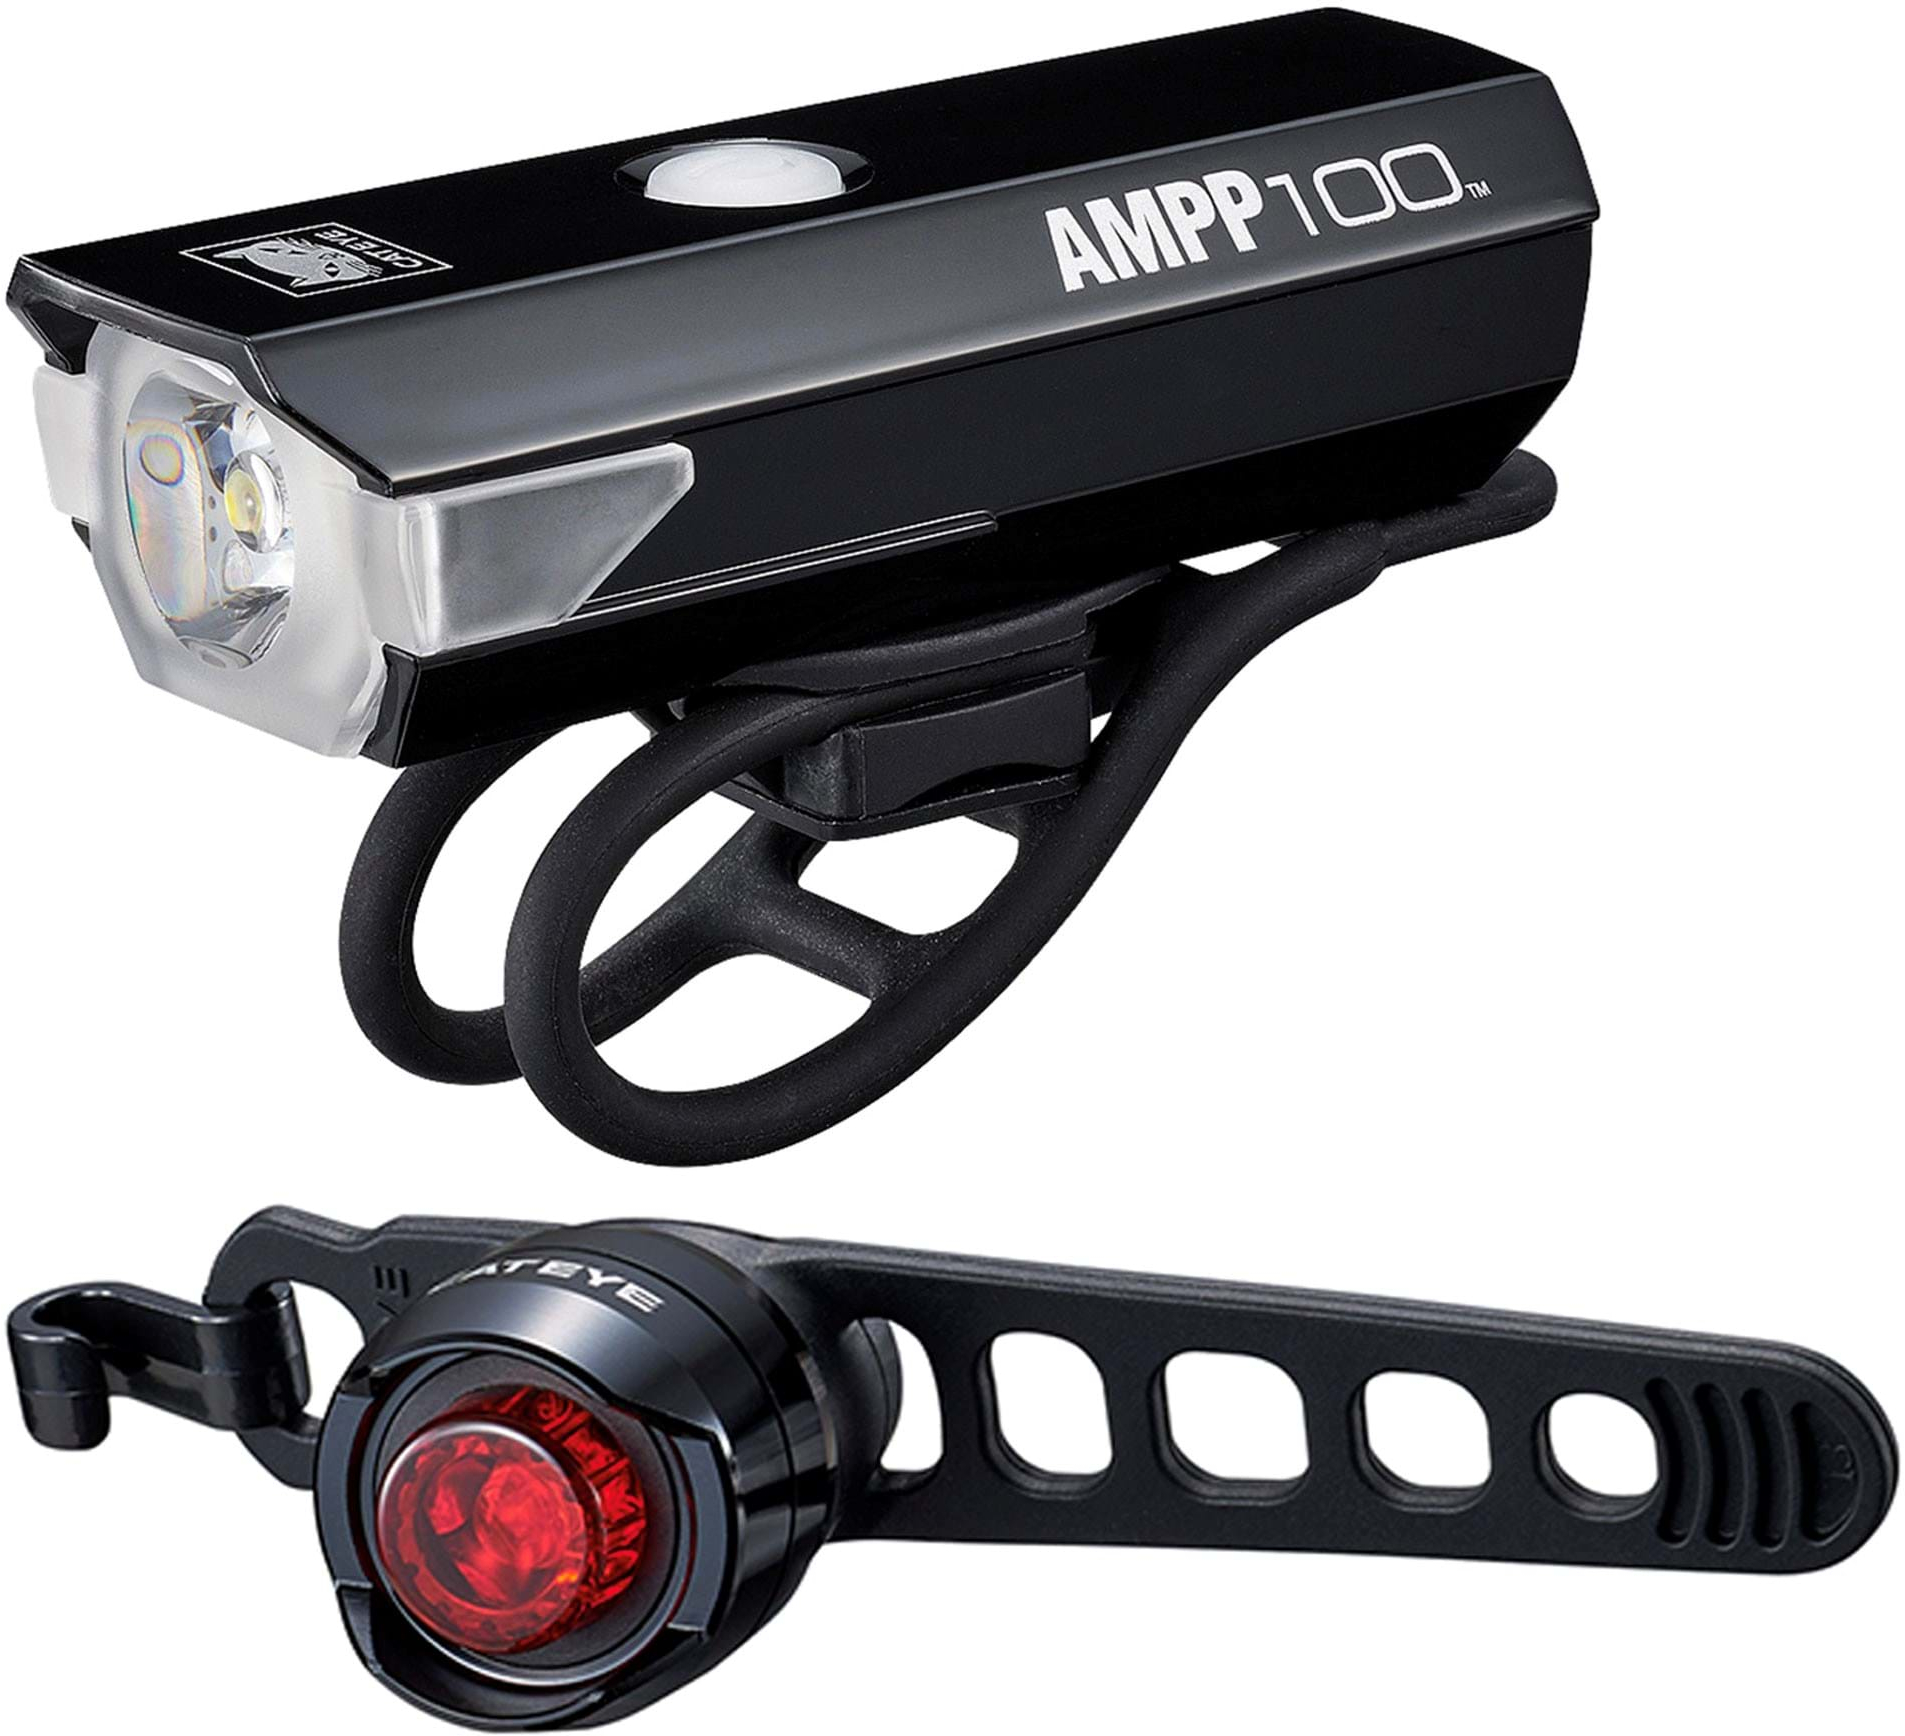 Cateye  Ampp 100 and ORB RC Rechargeable Bike Light Set NO SIZE NO COLOUR